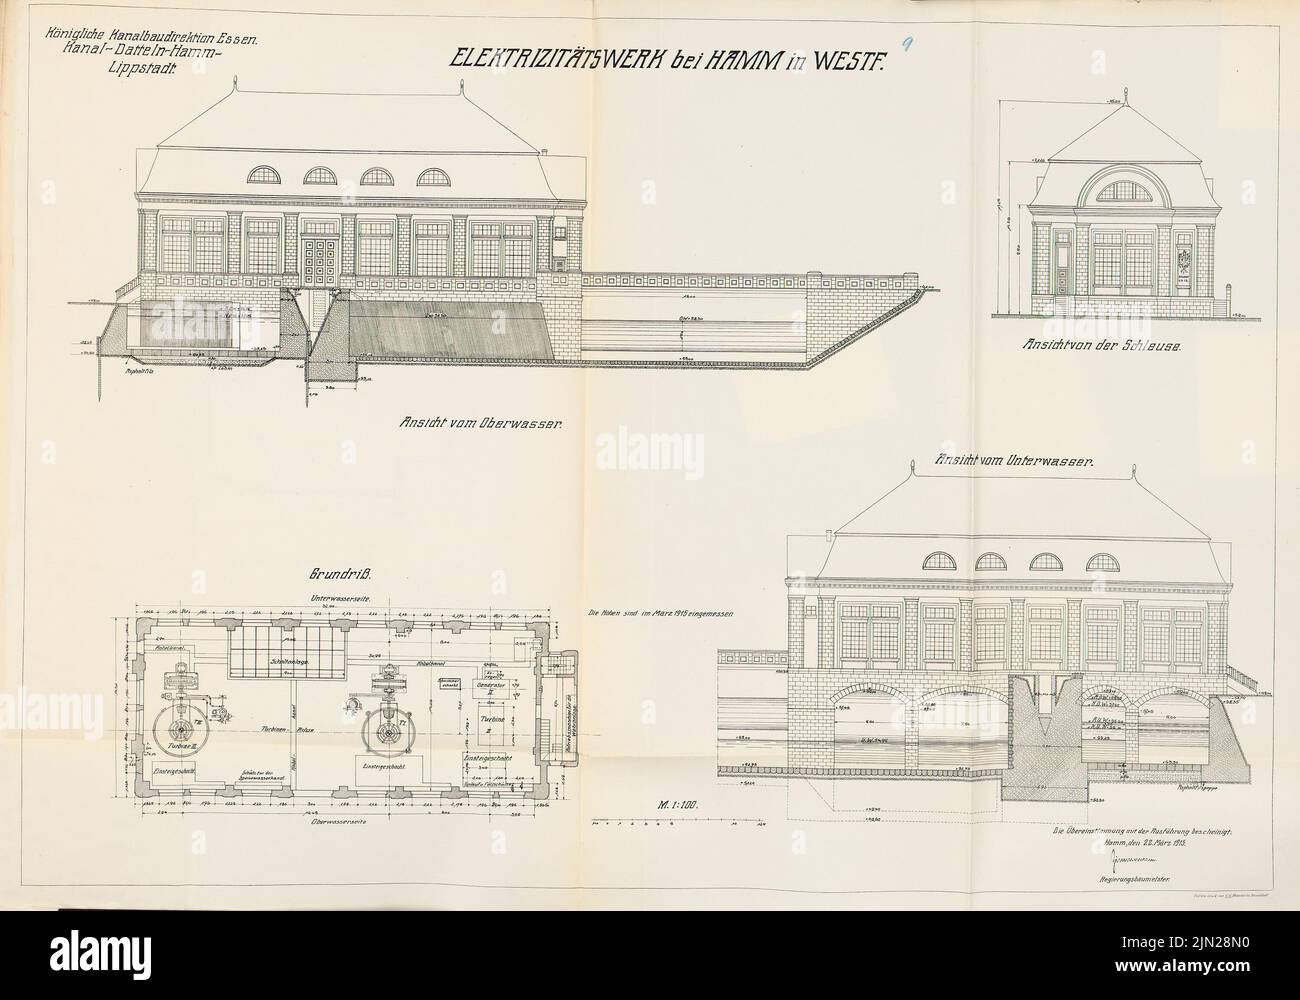 N.N., Canal Datteln-Hamm-Lippstadt. Electricity plant along with the lipweight and channel lock, Hamm: Elektrizitätswerk: Views, floor plan 1: 100. Lithograph on paper, 71.3 x 101.8 cm (including scan edges) Stock Photo